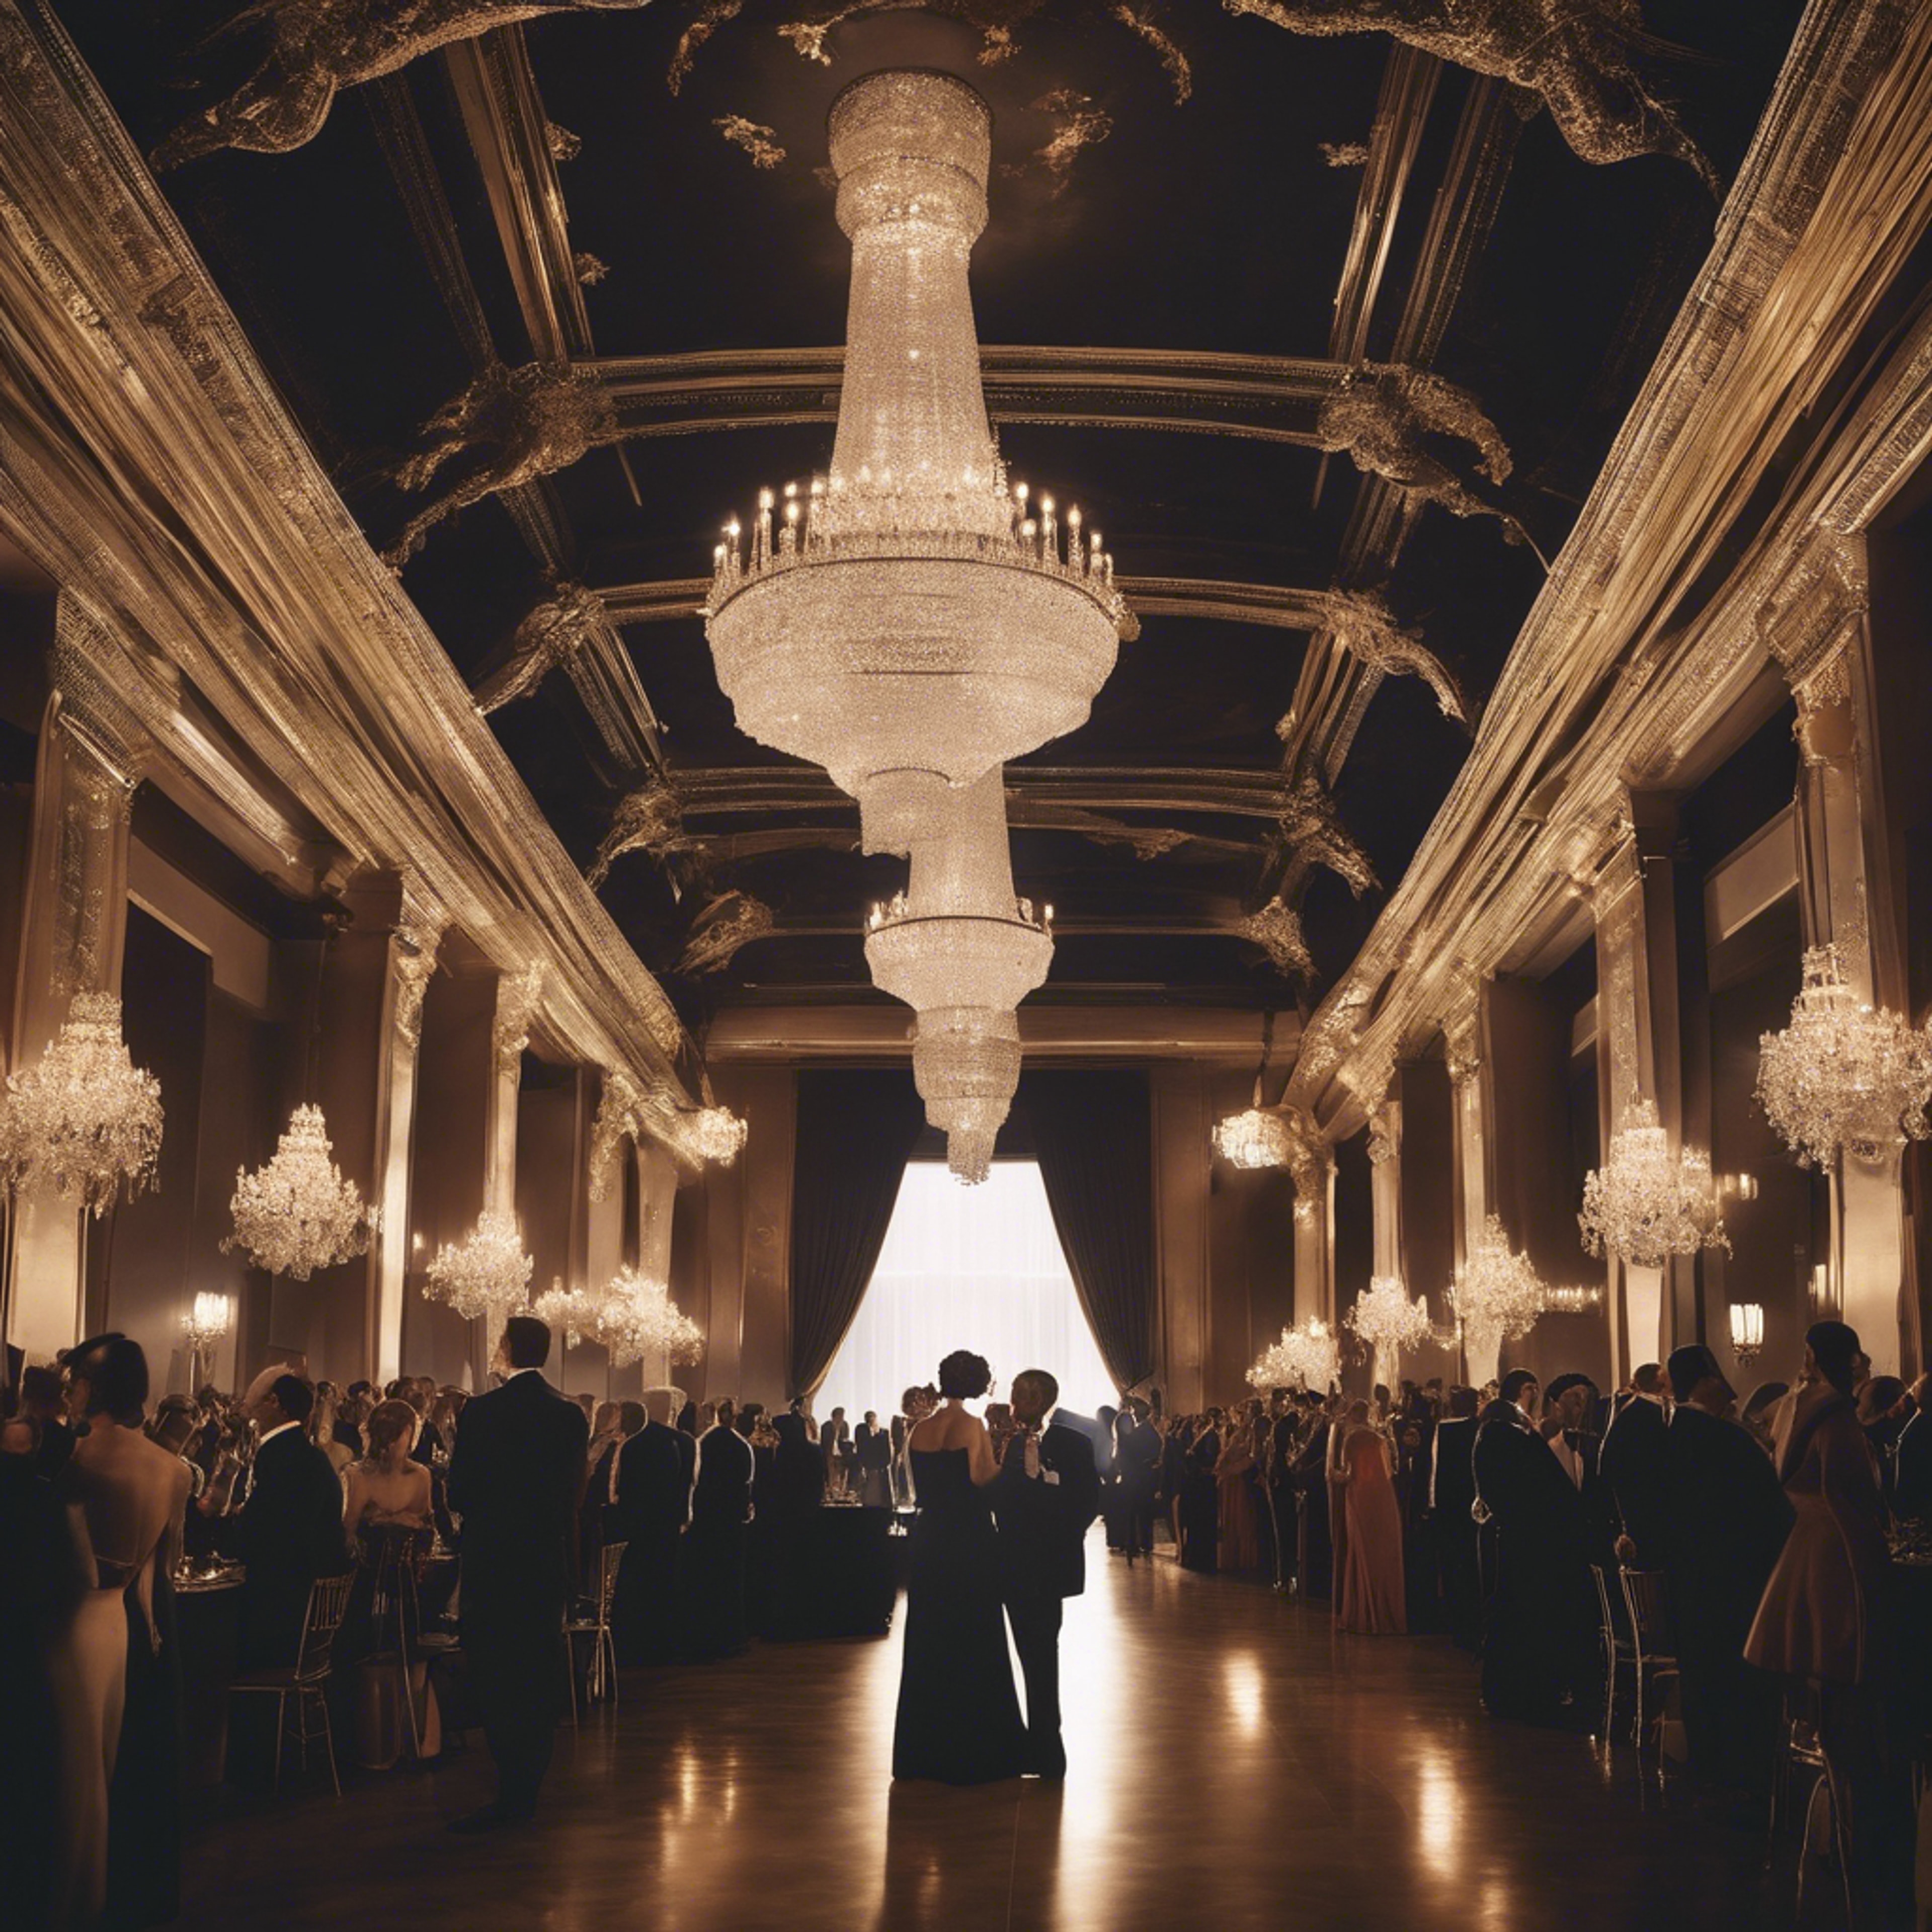 Formal black-tie gala event in a grand hall with crystal chandeliers and elegantly-dressed guests. Wallpaper[ddabc8c8efe84c92a873]